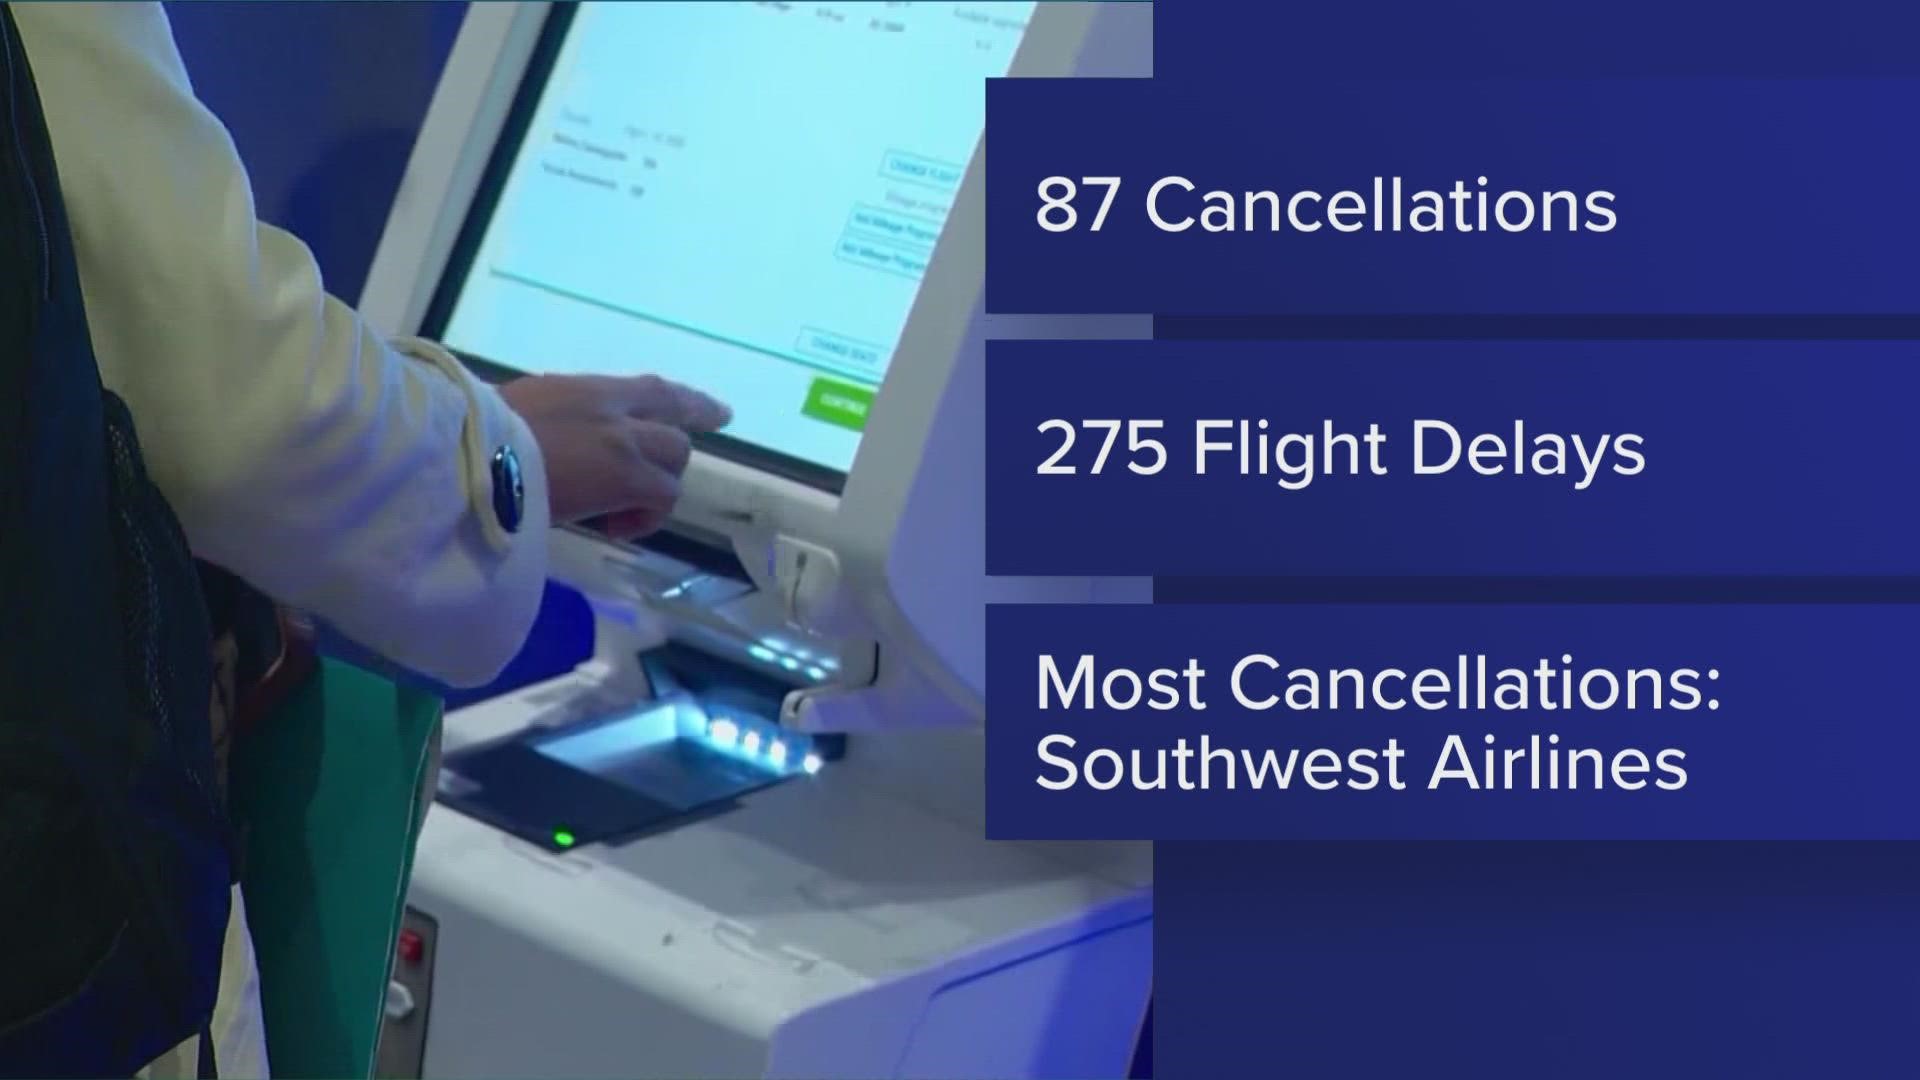 Southwest Airlines had the most cancelations on Friday, with a total of 46.